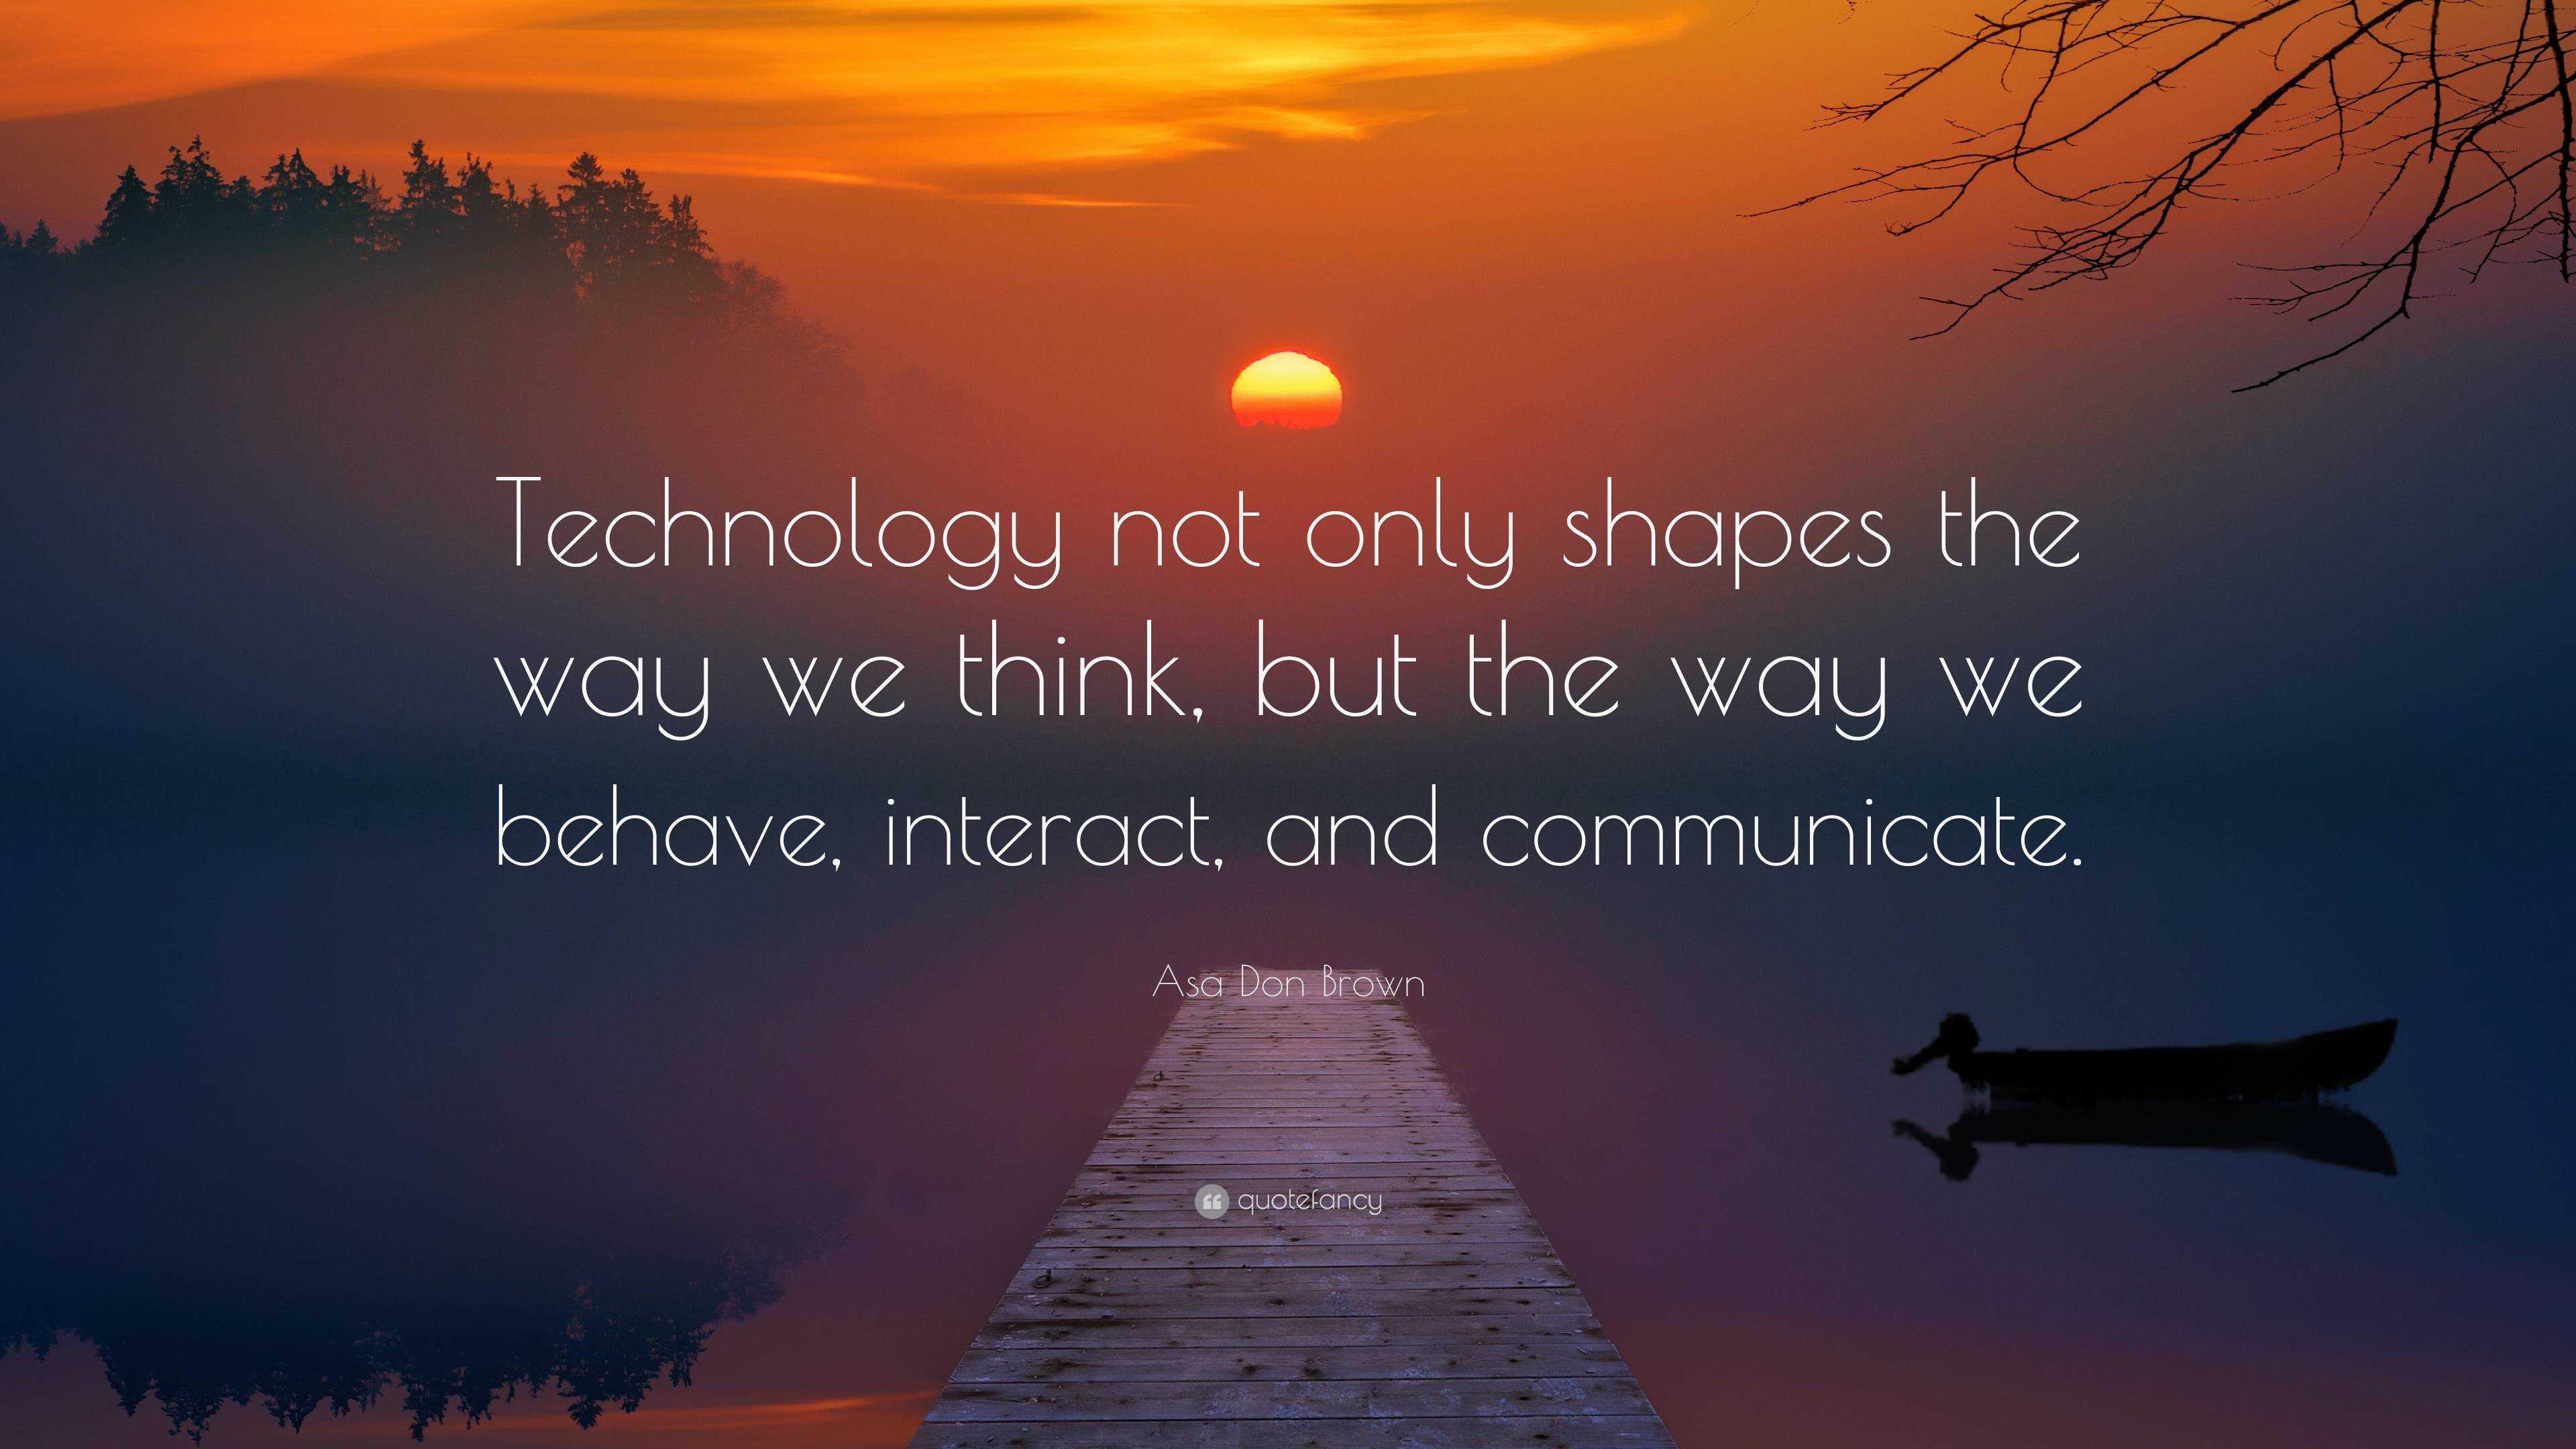 Asa Don Brown Quote: “Technology not only shapes the way we think, but ...